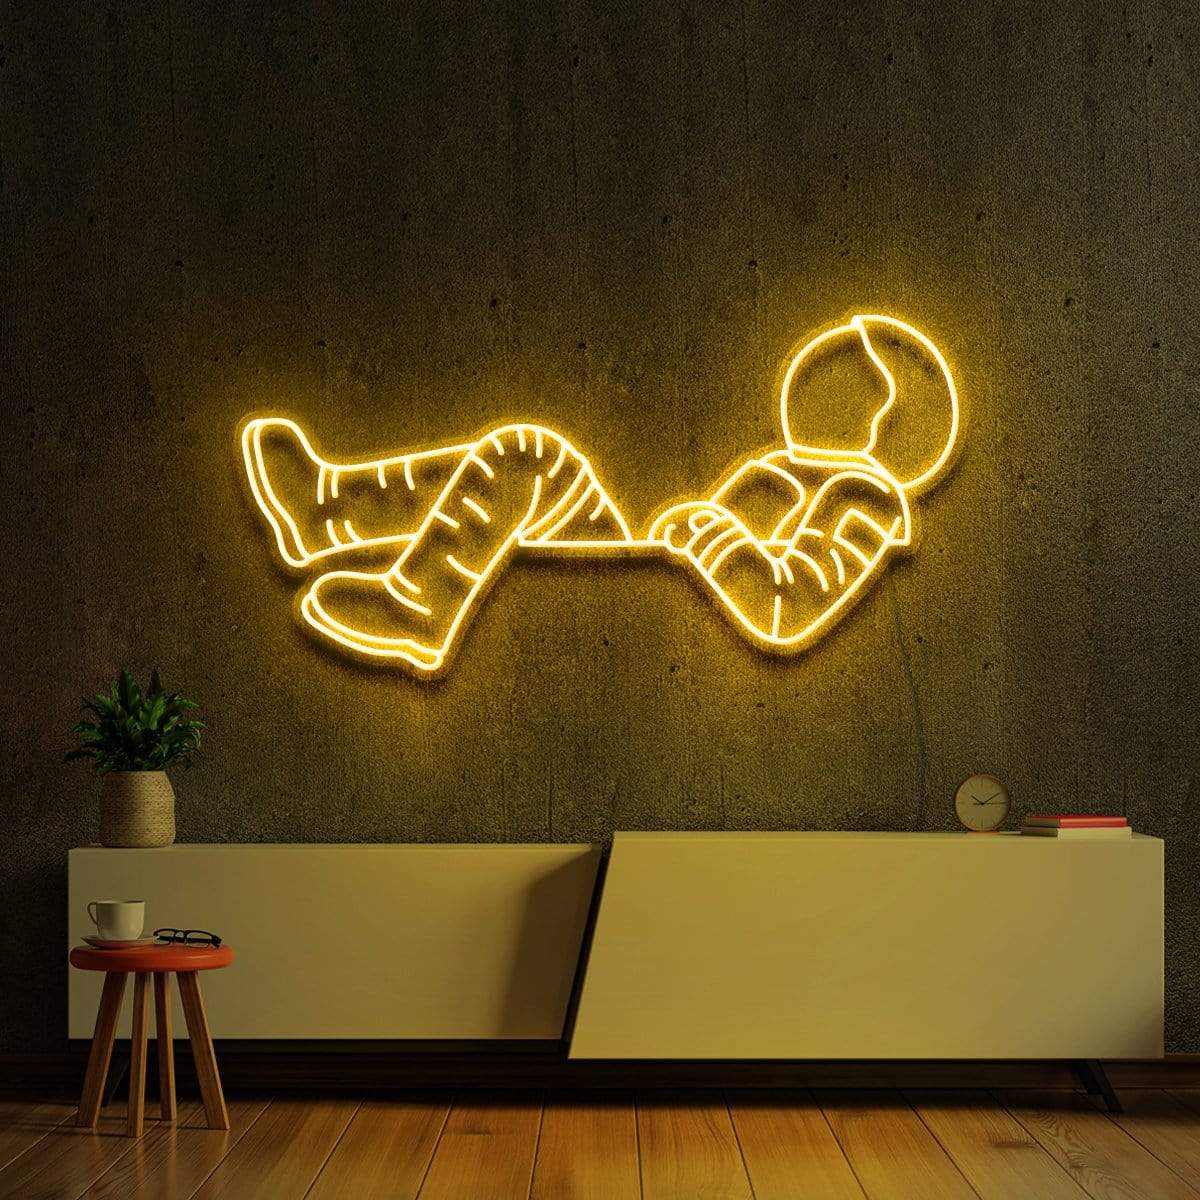 "Lost in Space" Neon Sign